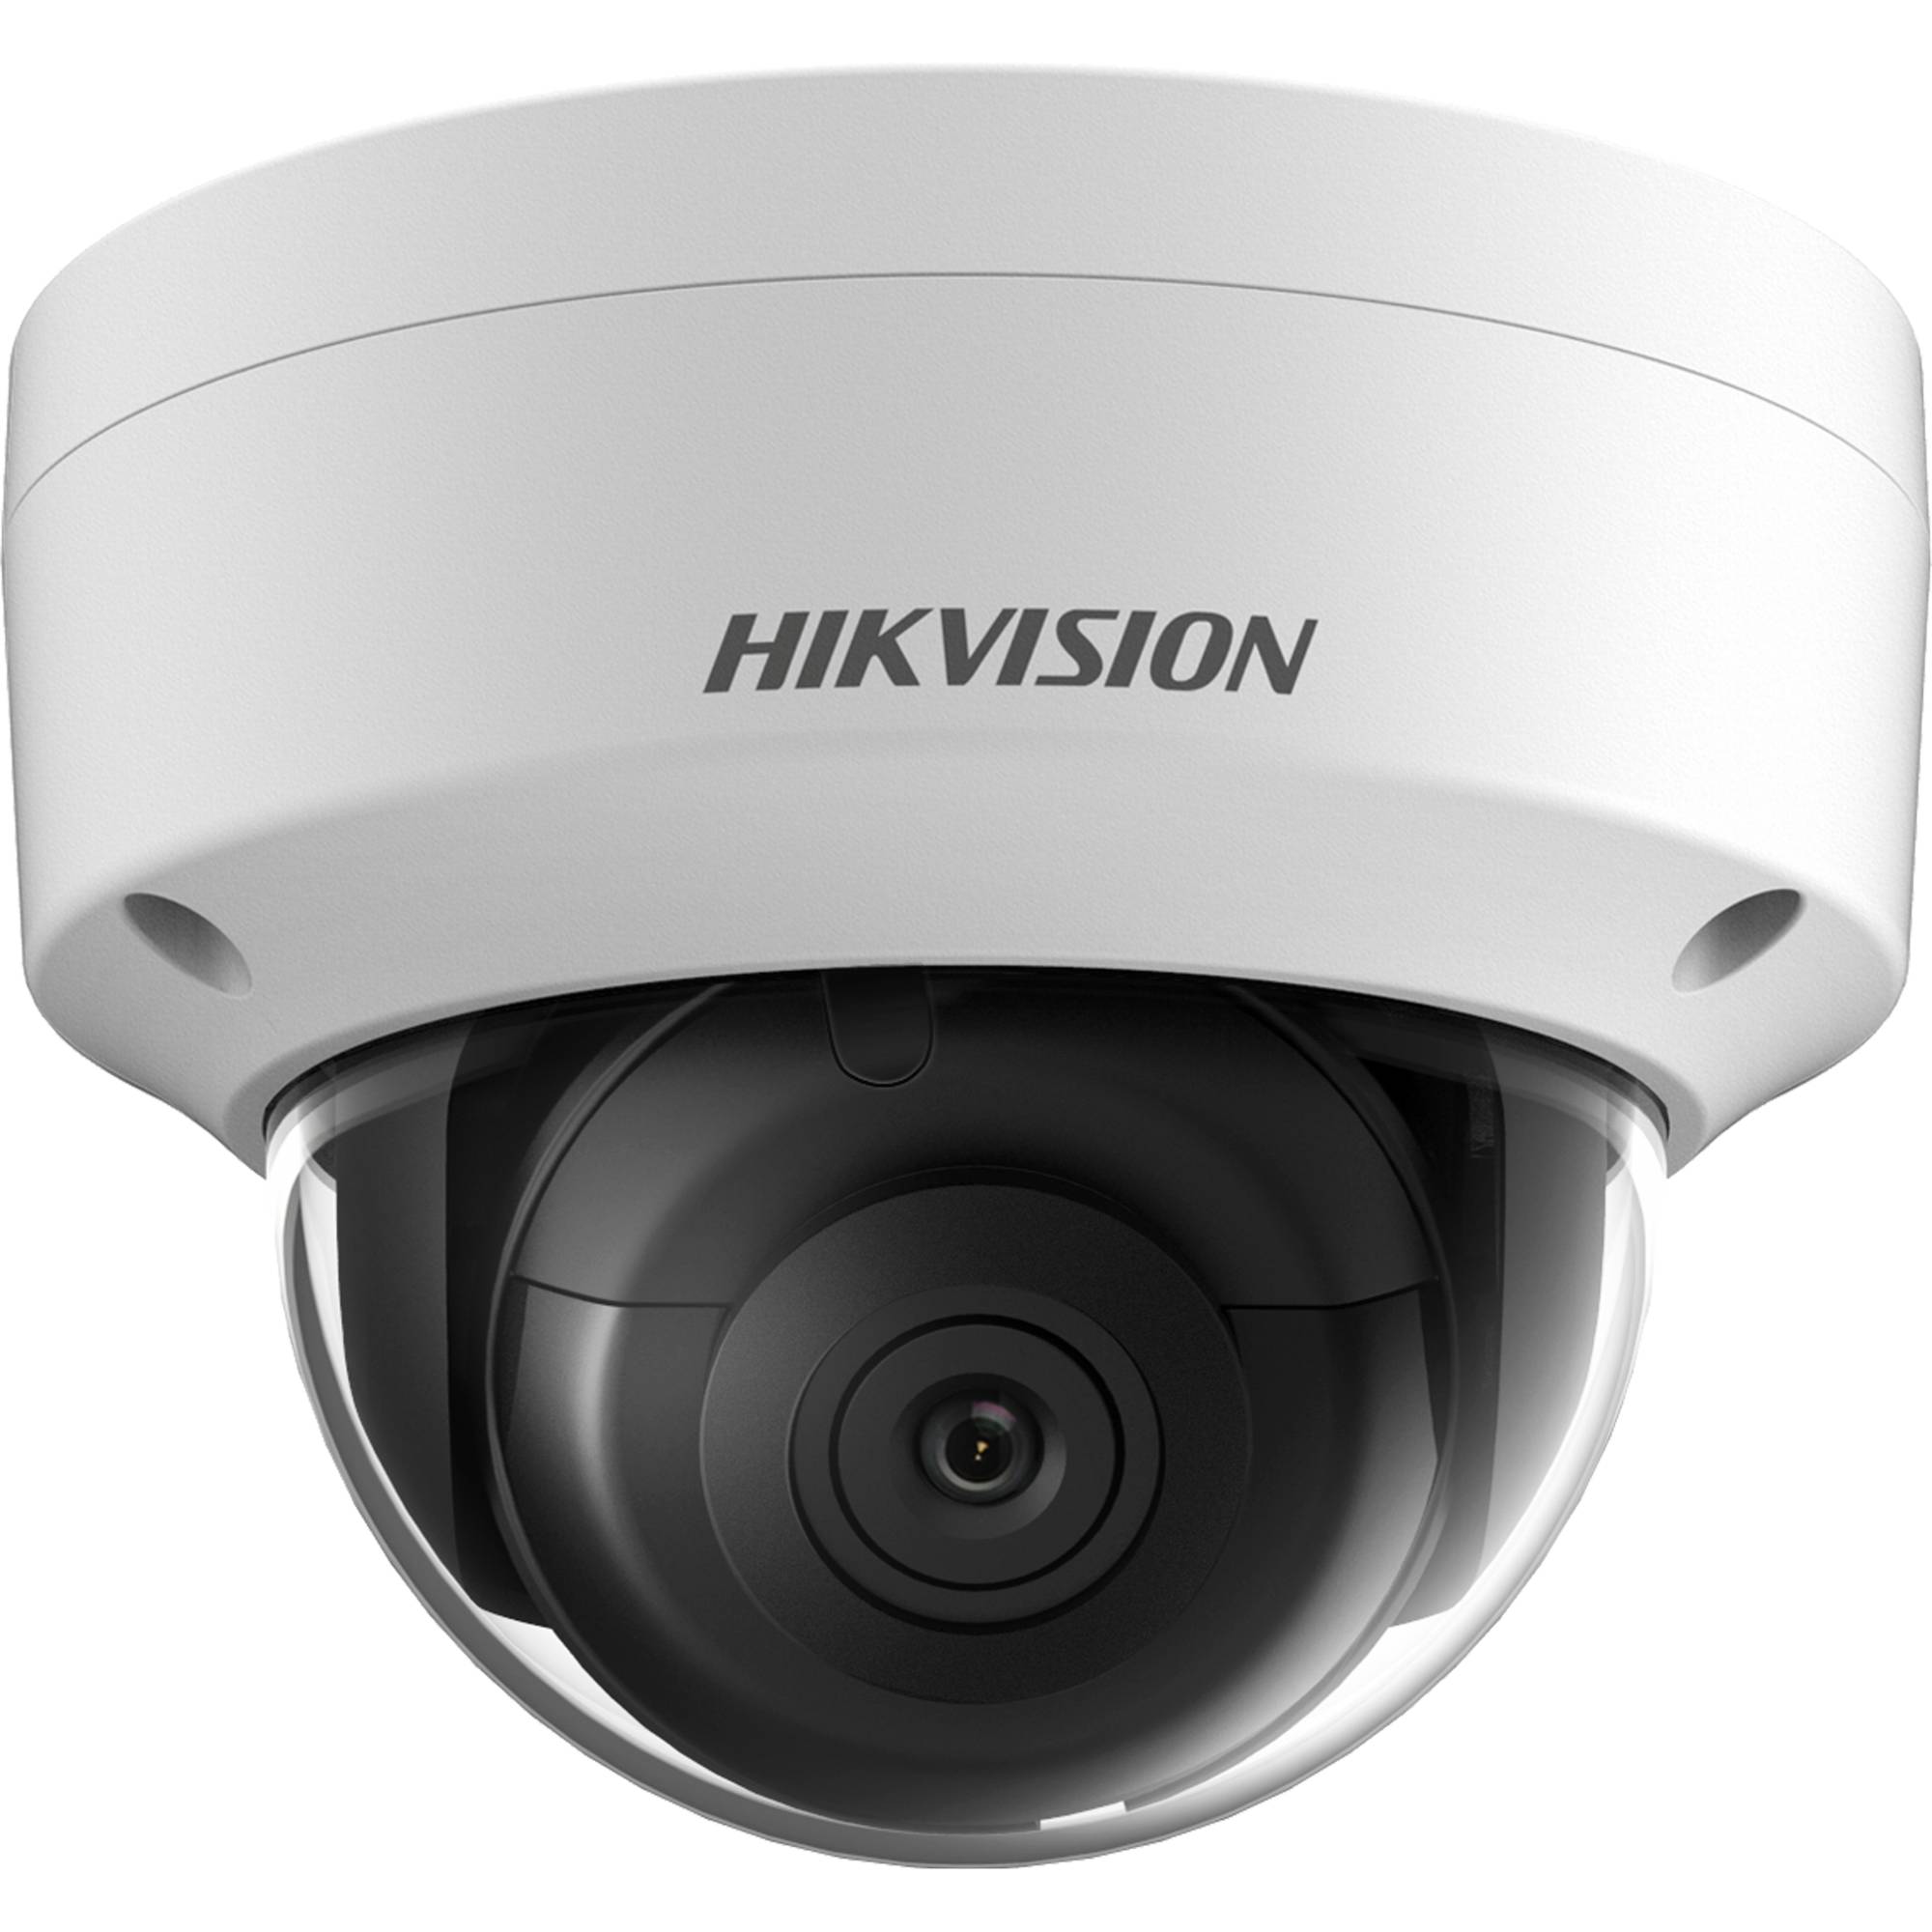 ir fixed dome network camera